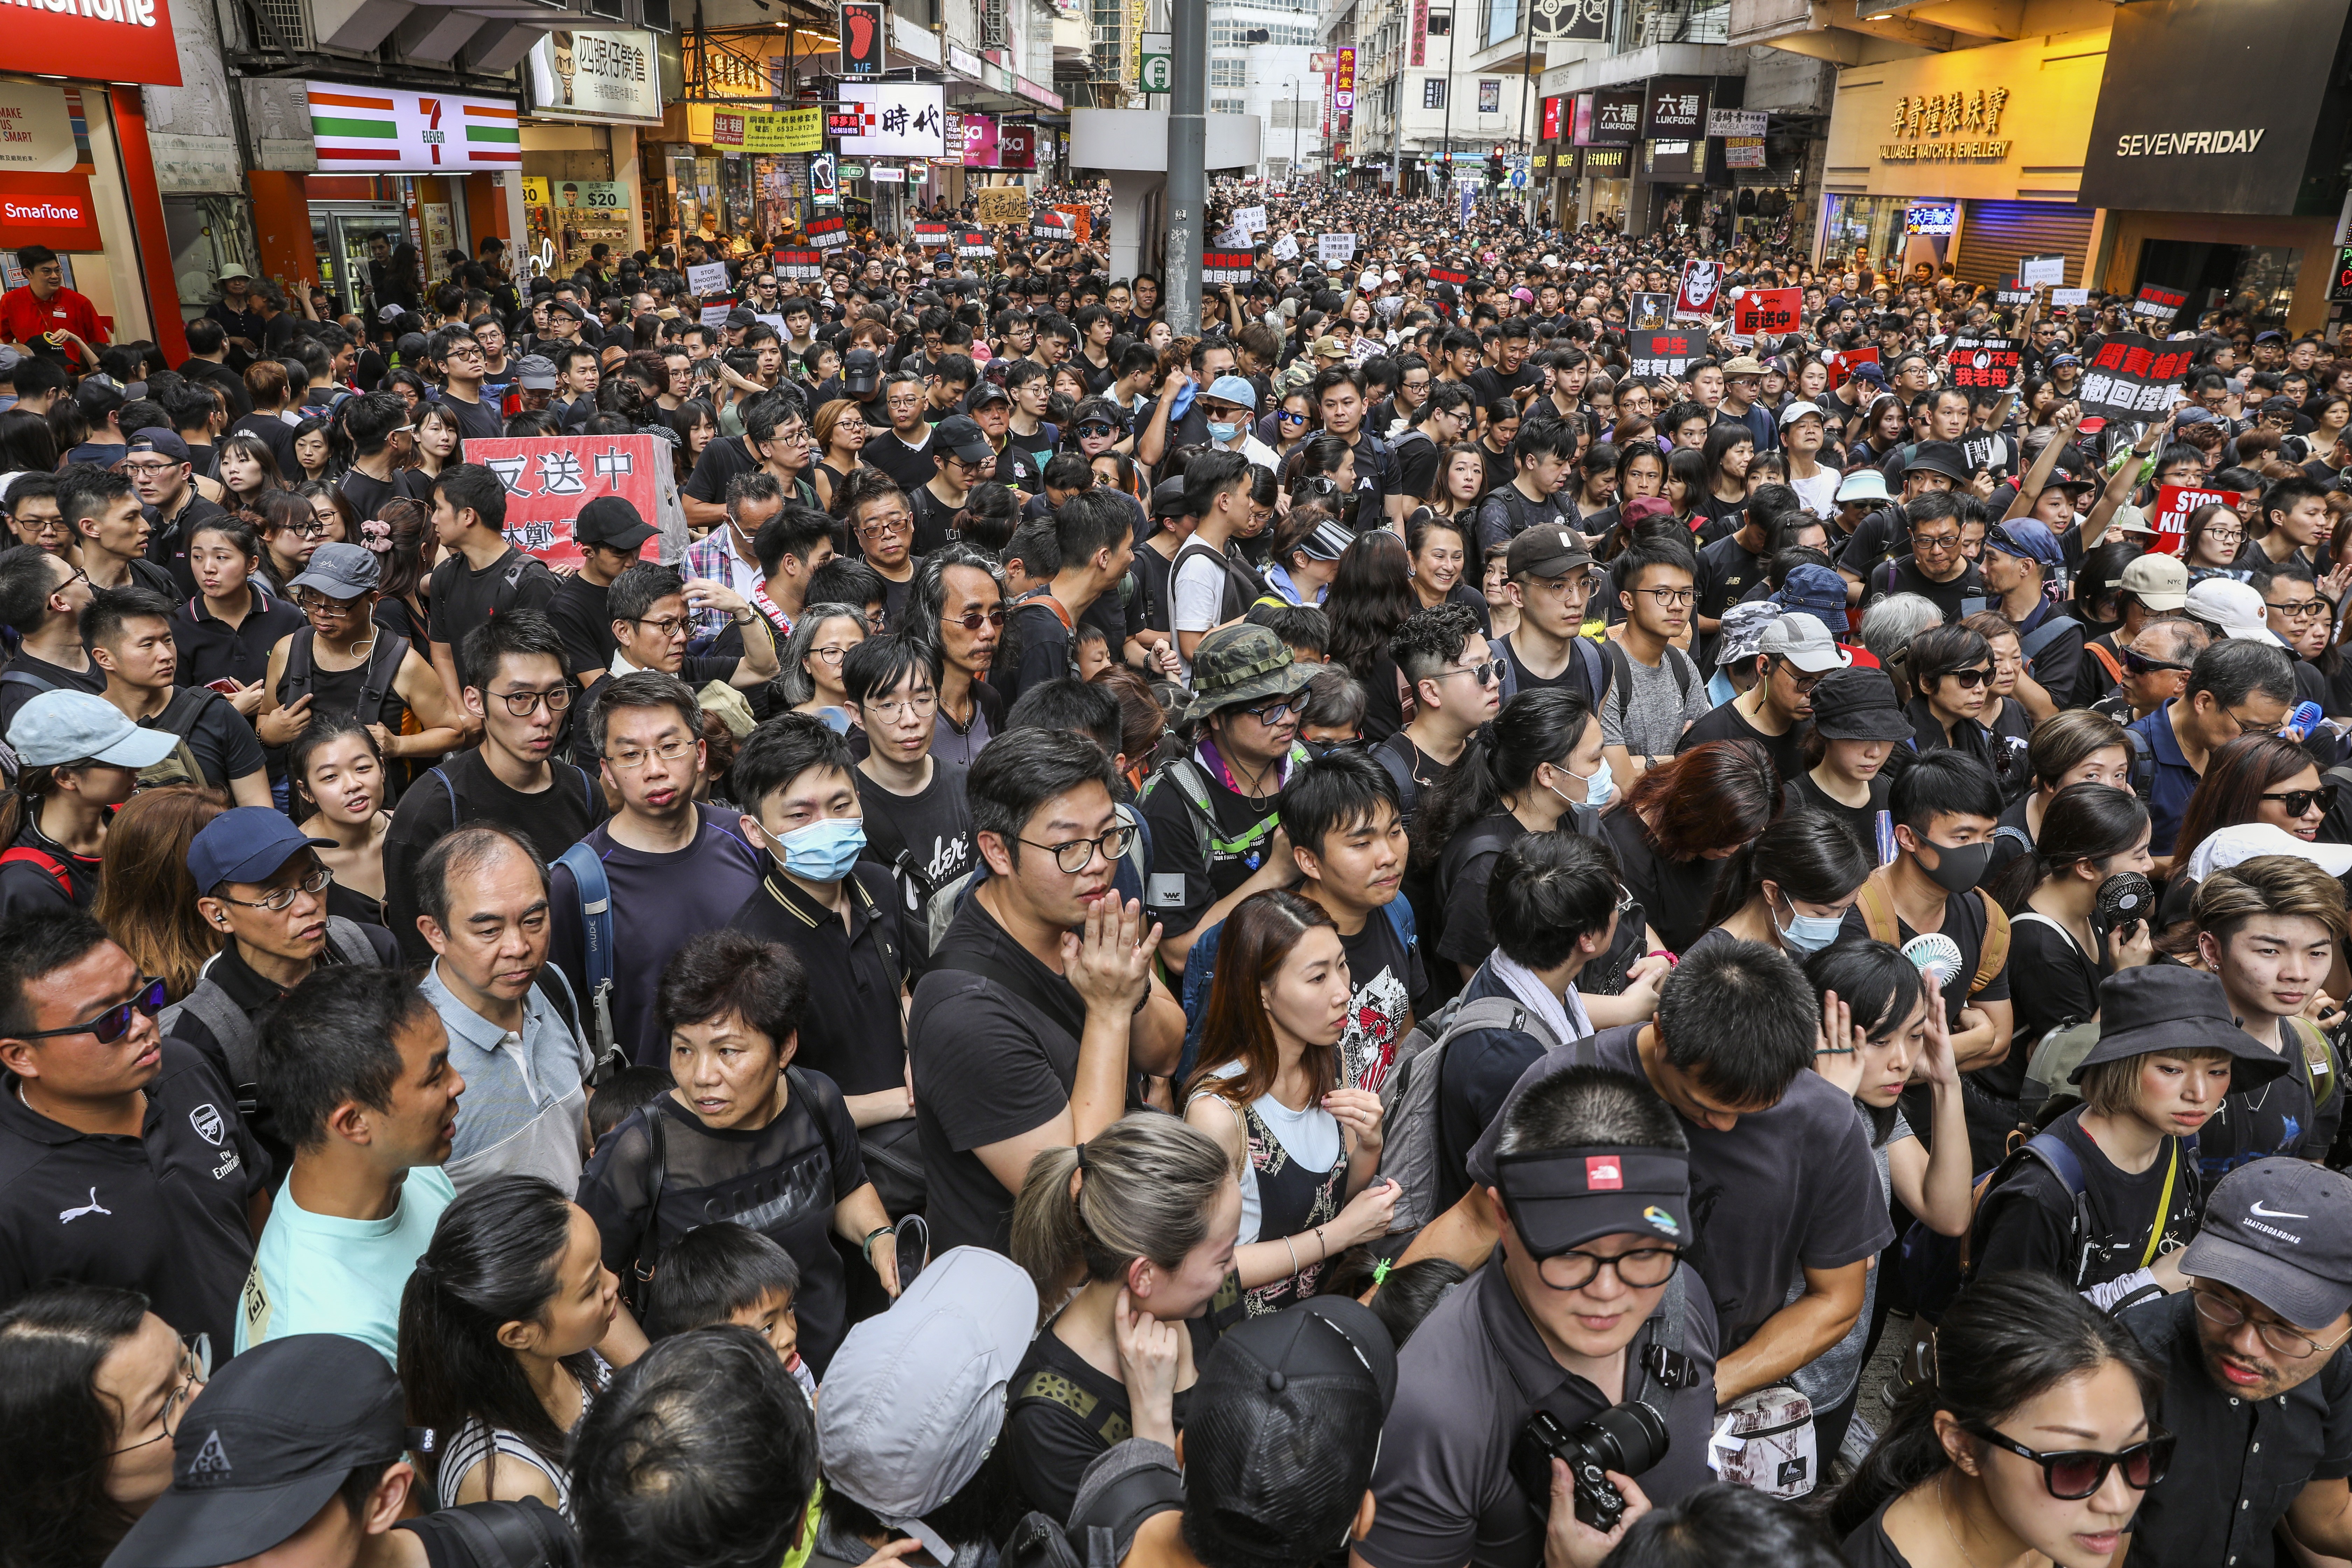 Protesters march from Causeway Bay to the Central Government Offices in Tamar against the extradition bill on June 16, 2019.